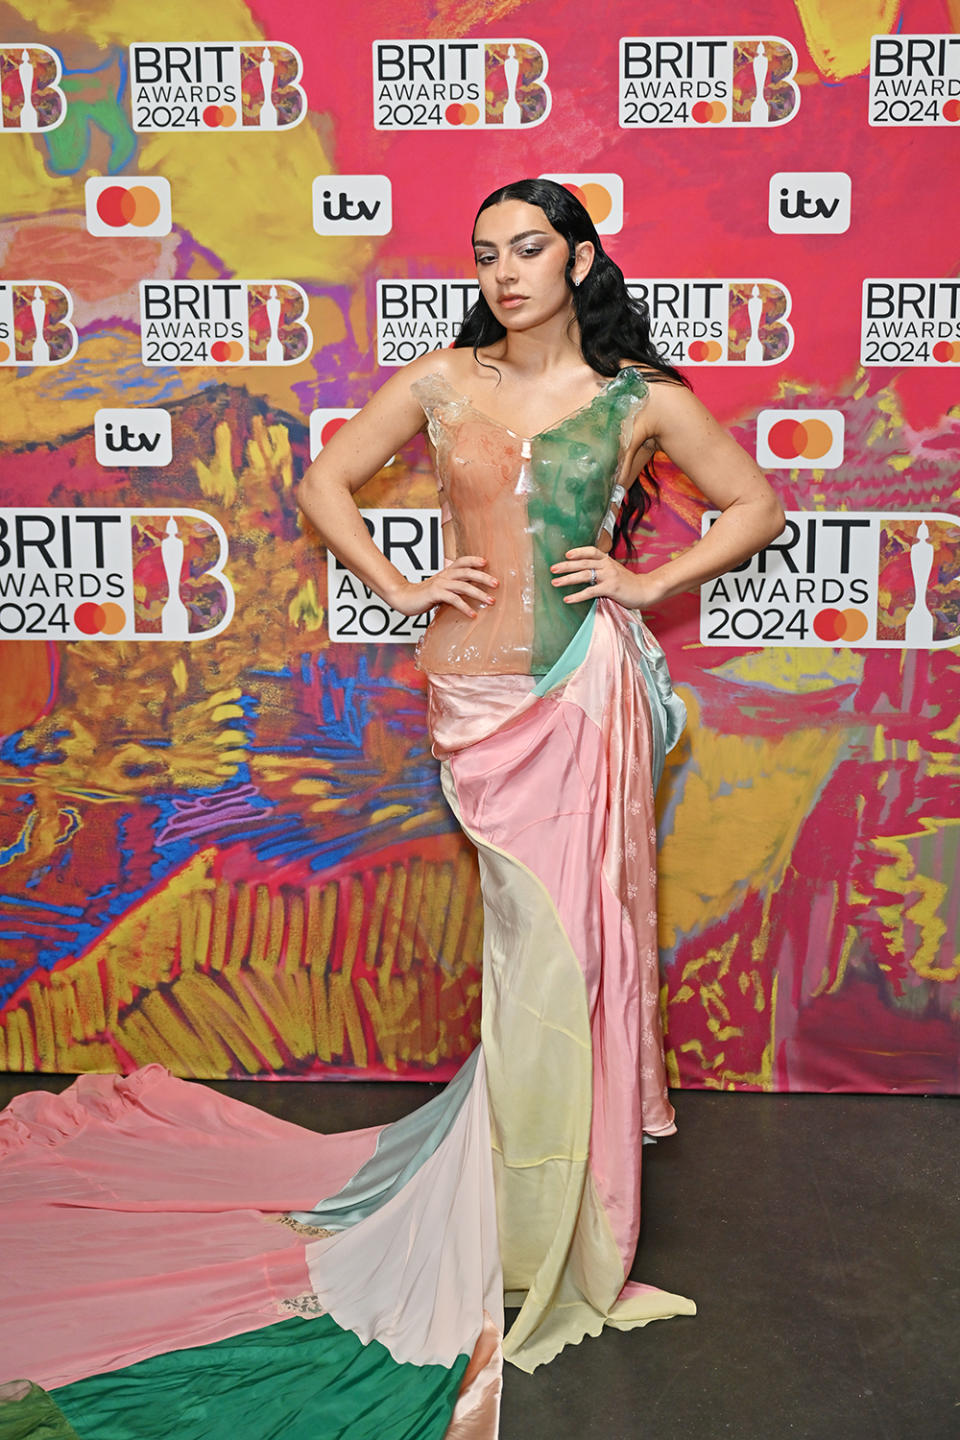 Charli XCX attends the Brit Awards on Mar. 2 in London.